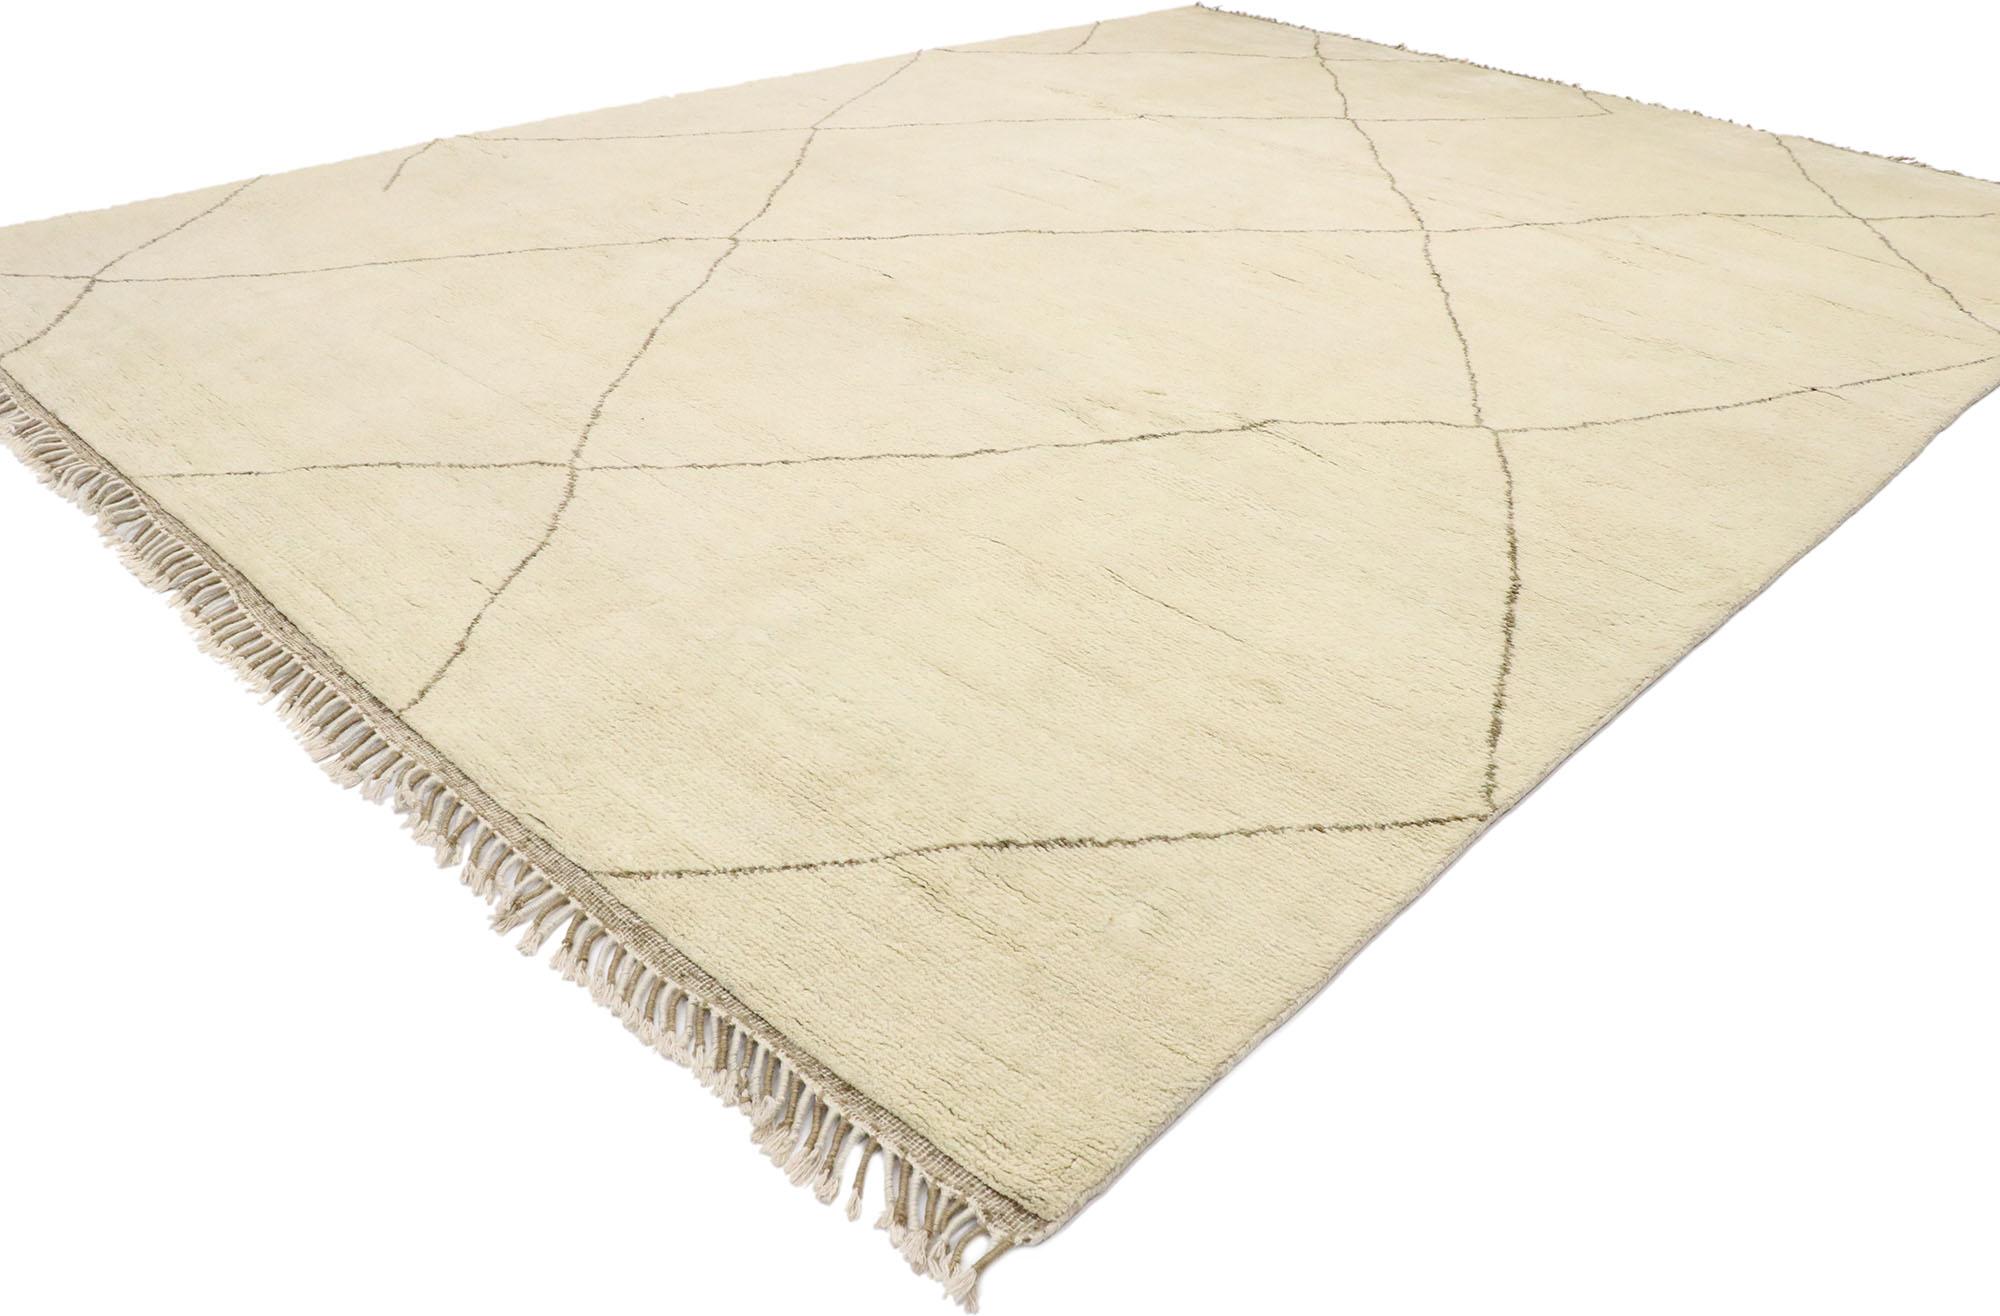 30546 New Modern Style Neutral Moroccan Rug, 10'04 x 13'09.
Emulating Hygge vibes and Shibui with a plush pile, this hand knotted wool Moroccan area rug is simple and subtle. The minimal design and neutral colors woven into this piece work together